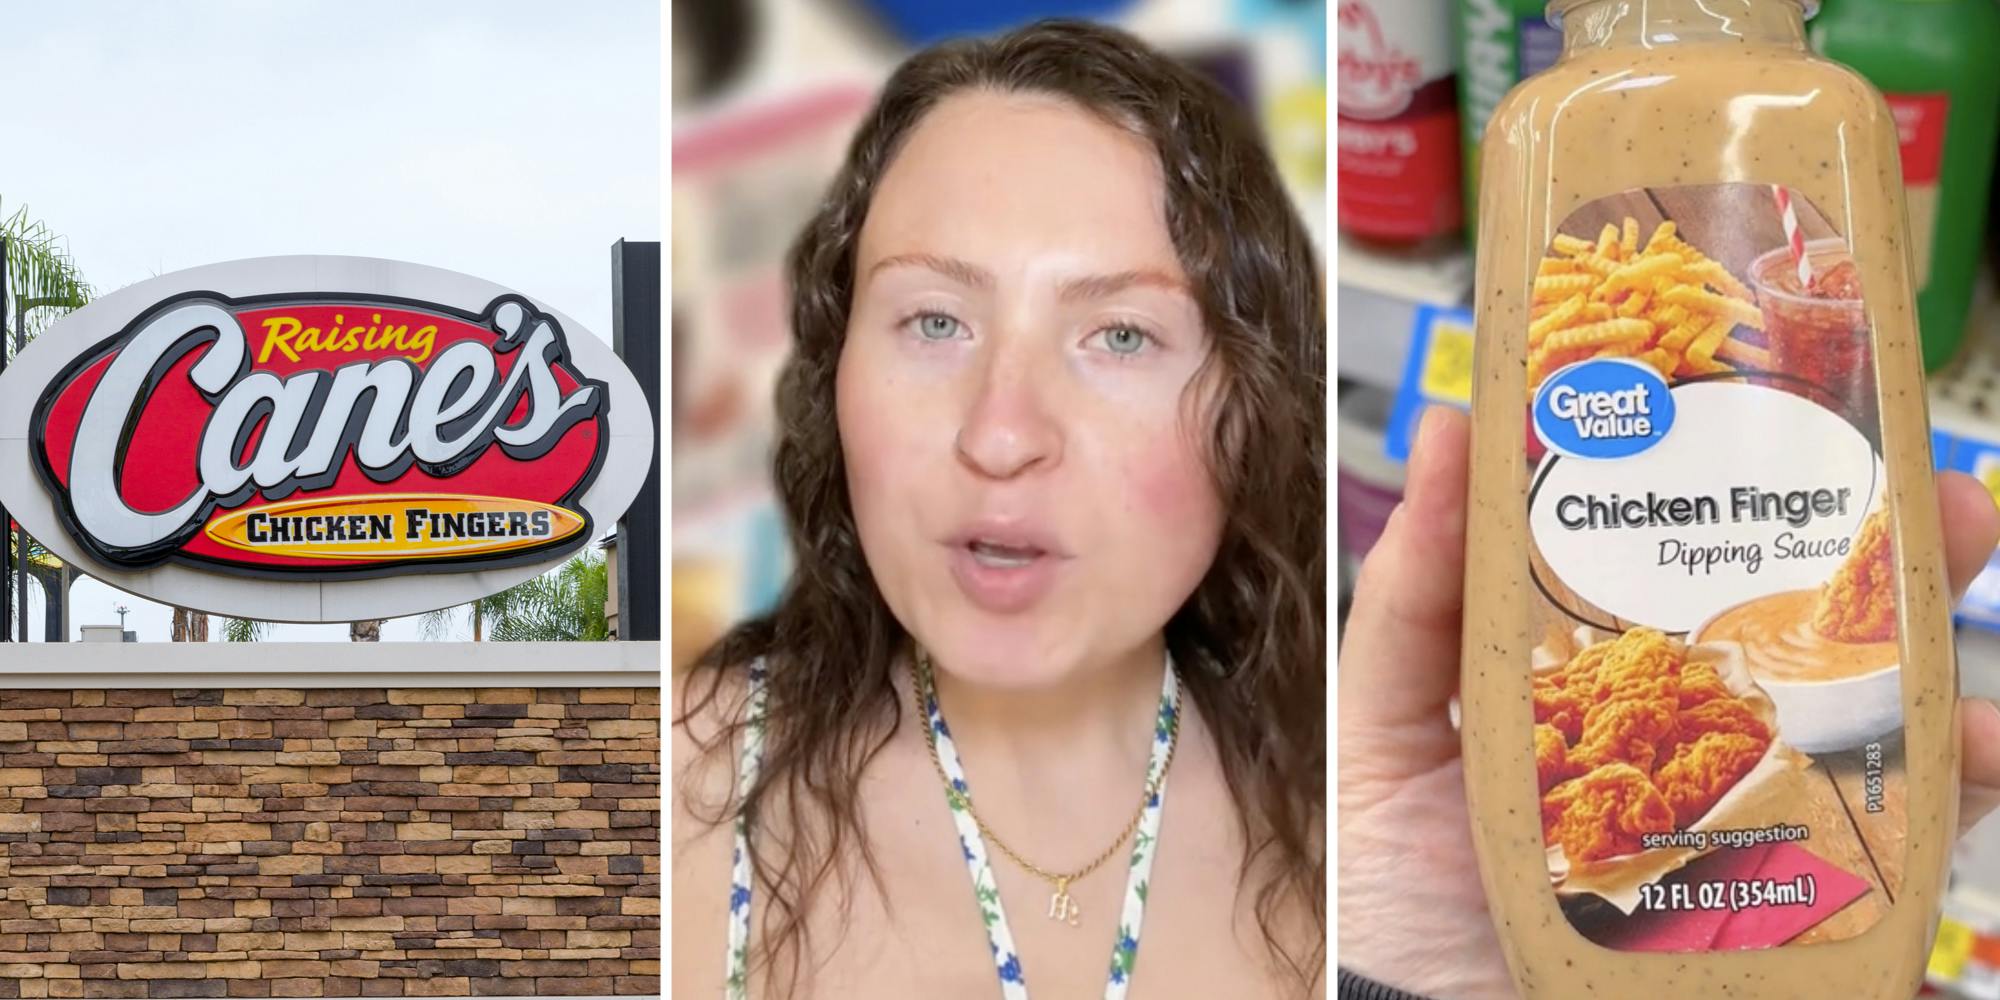 ‘Walmart’s about to put Raising Cane’s out of business’: Shopper finds Great Value dupe for Raising Cane’s sauce. Is it worth it?